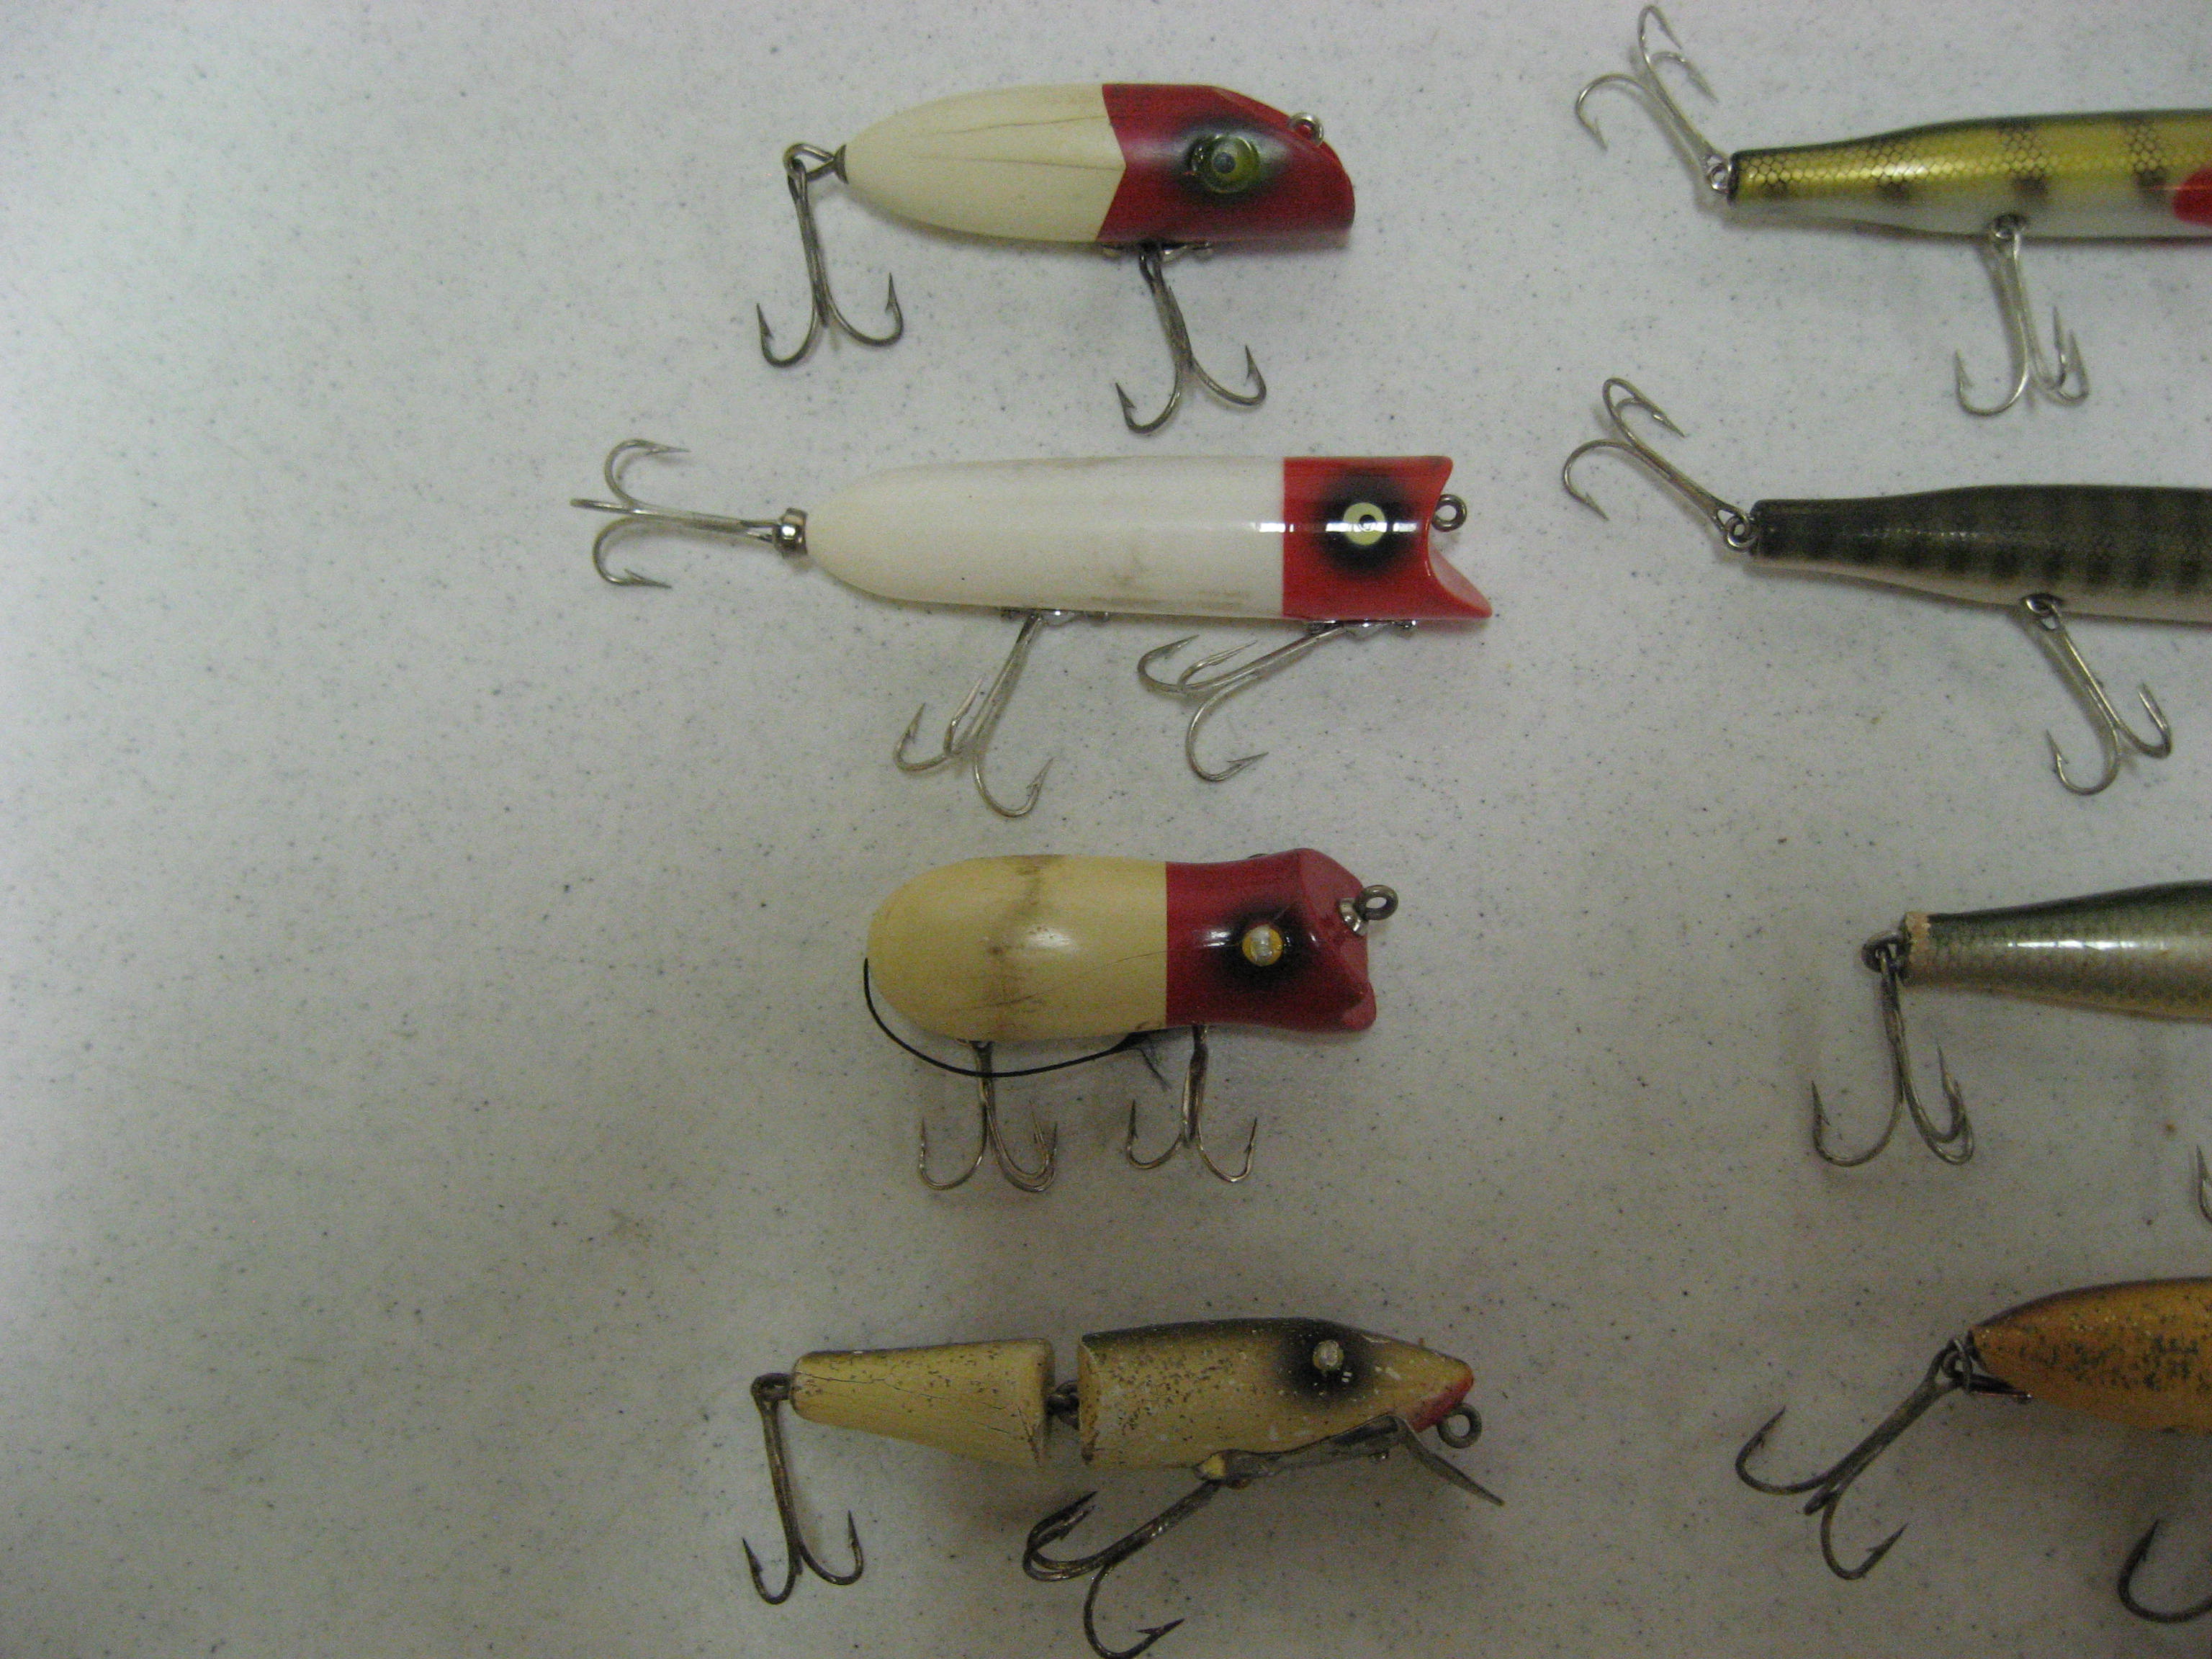 Heddon Meadow Mouse  Old Antique & Vintage Wood Fishing Lures